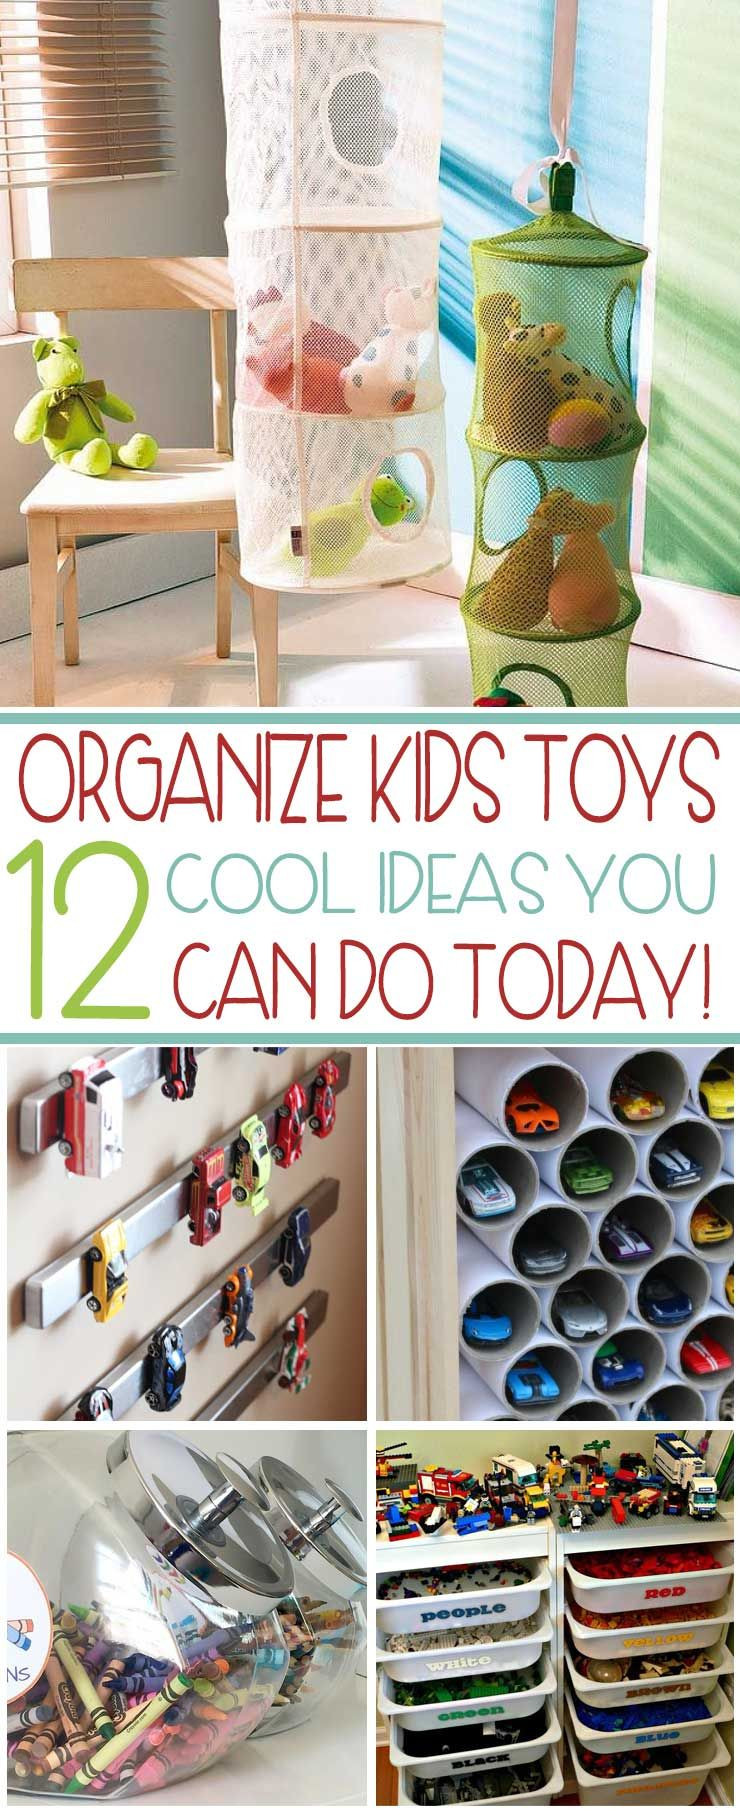 Kids Toy Organizing Ideas
 Organize Your Kids Toys TODAY With These 12 Cool Ideas